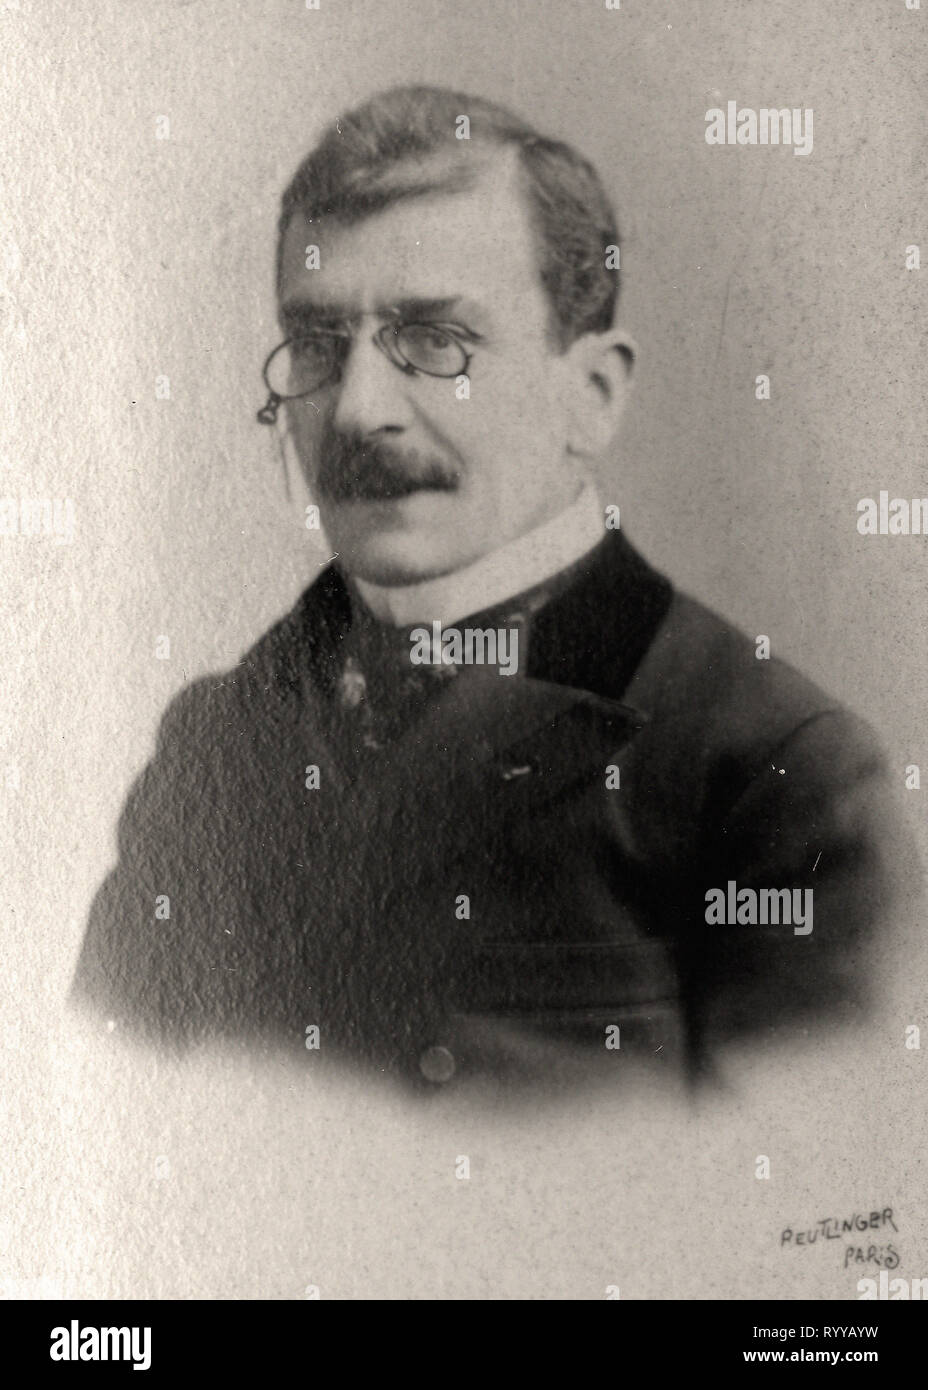 Photographic Portrait Of Brunetire   From Collection Félix Potin, Early 20th Century Stock Photo